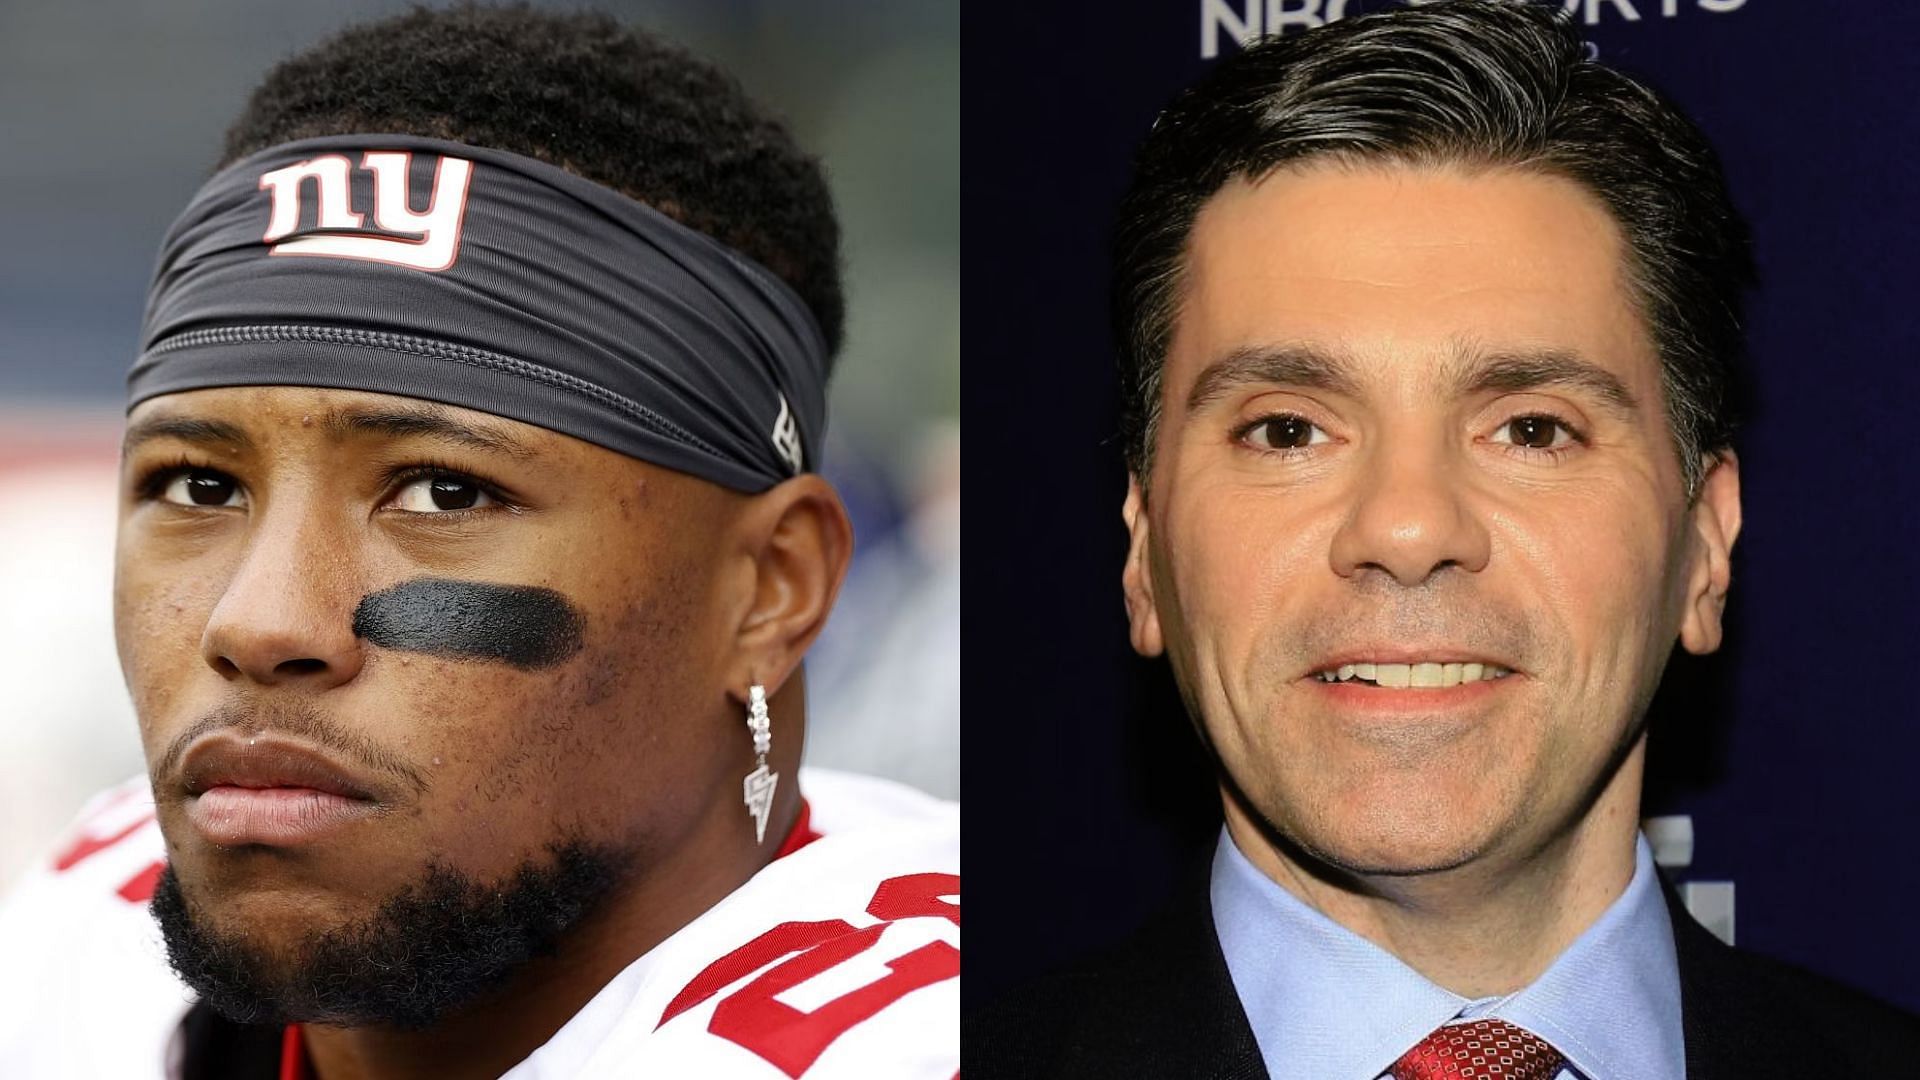 Pro Football Talk host Mike Florio gets criticized by fans after Saquon Barkley&rsquo;s tweet about contract situation.